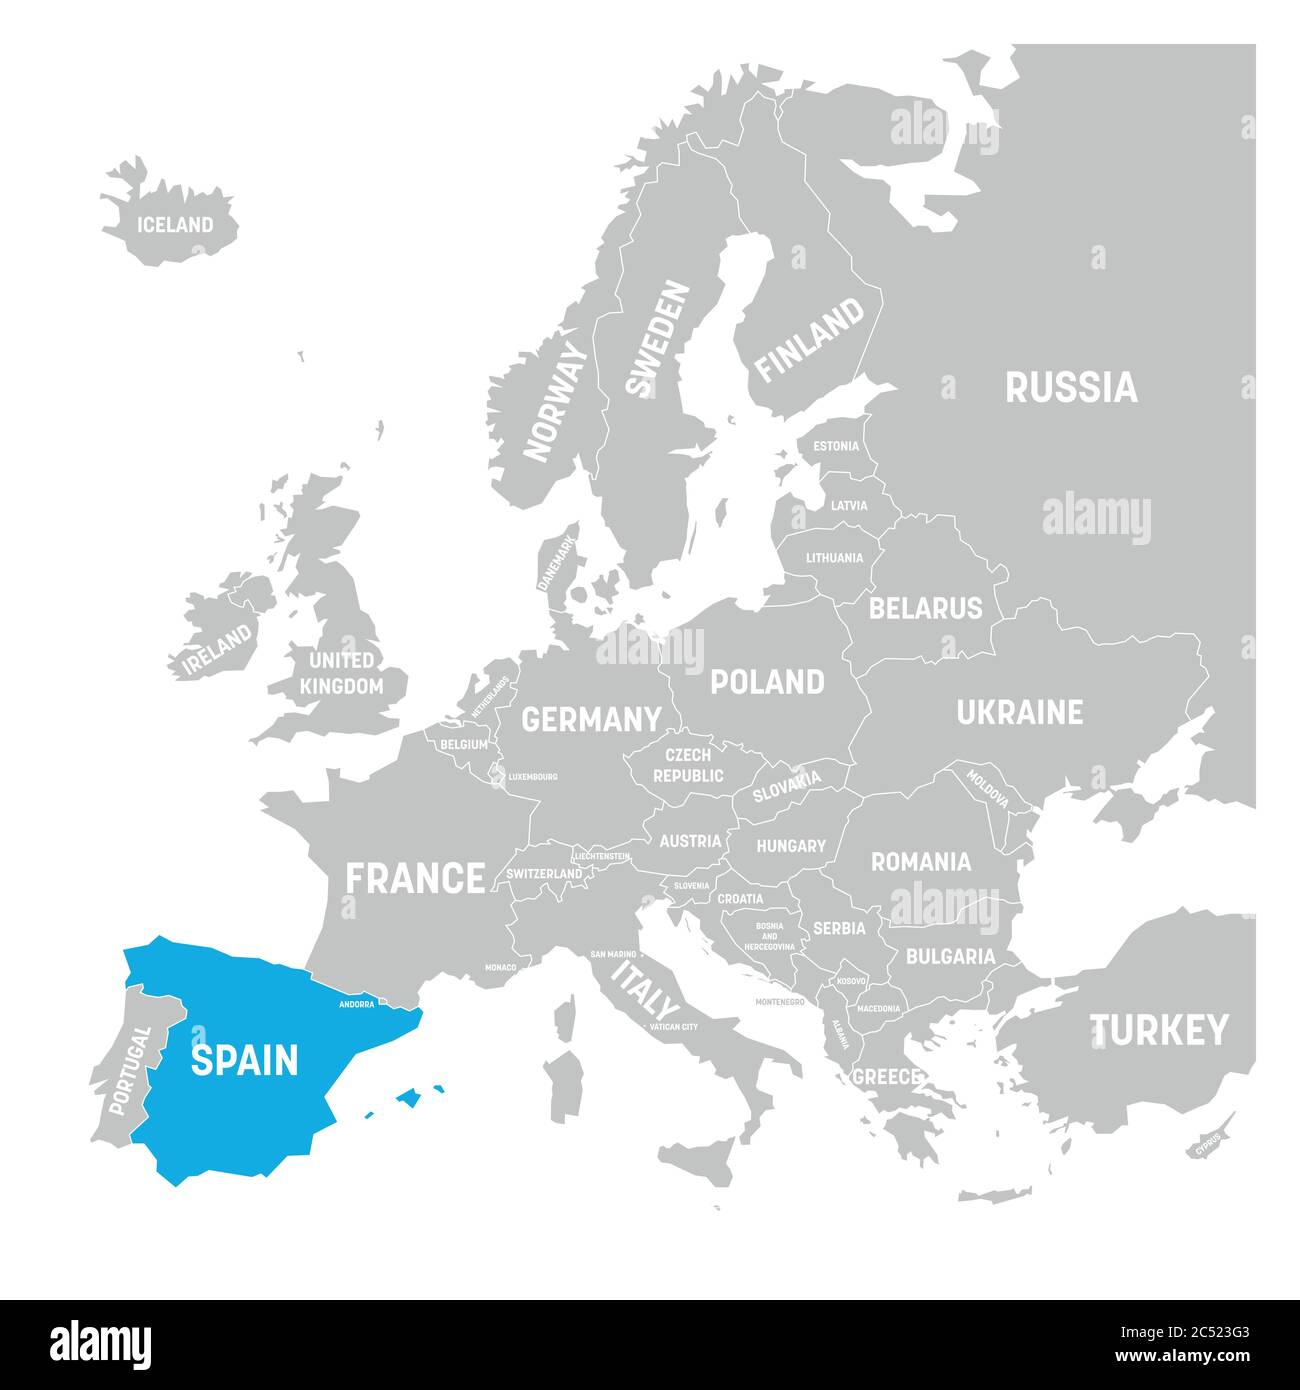 Spain marked by blue in grey political map of Europe. Vector illustration. Stock Vector